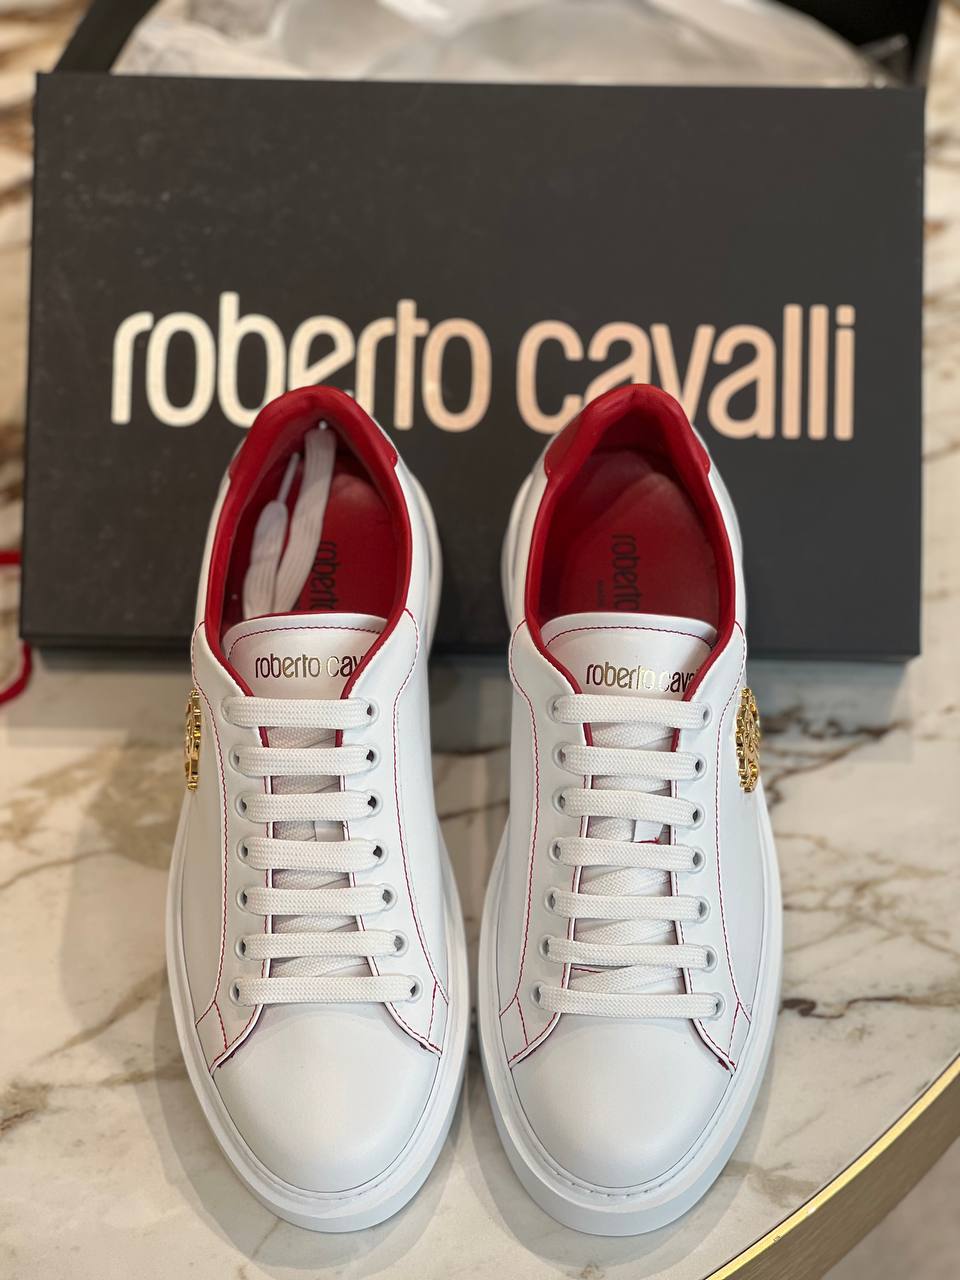 Roberto Cavalli Outlets 5770